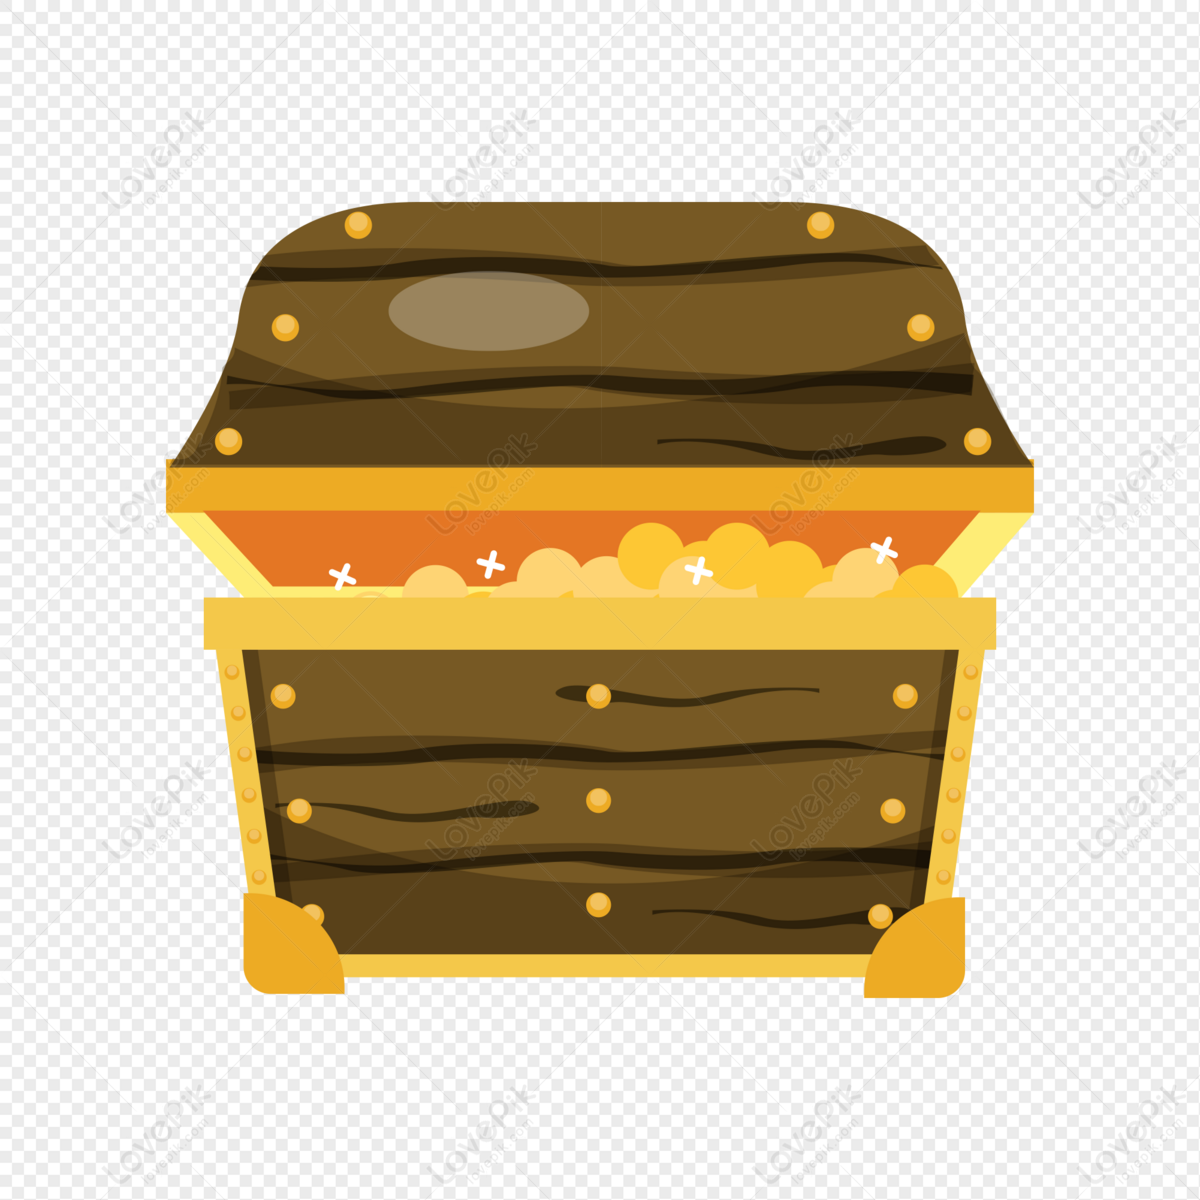 Treasure Chest Free PNG And Clipart Image For Free Download - Lovepik |  401721169